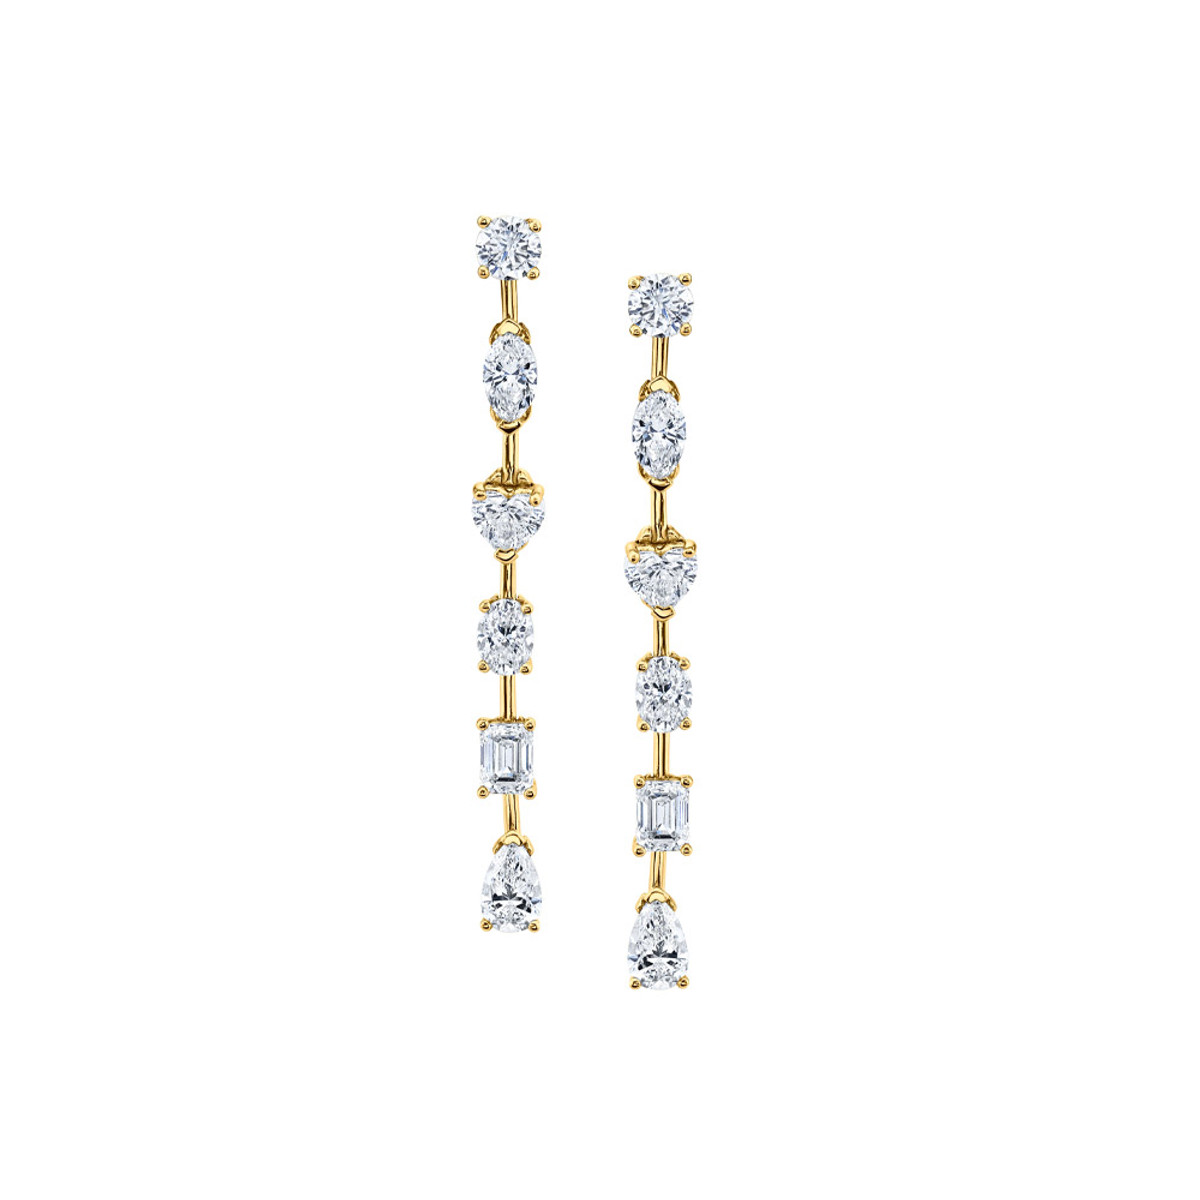 Hyde Park Collection 18K Yellow Gold Diamond Earrings-55847 Product Image